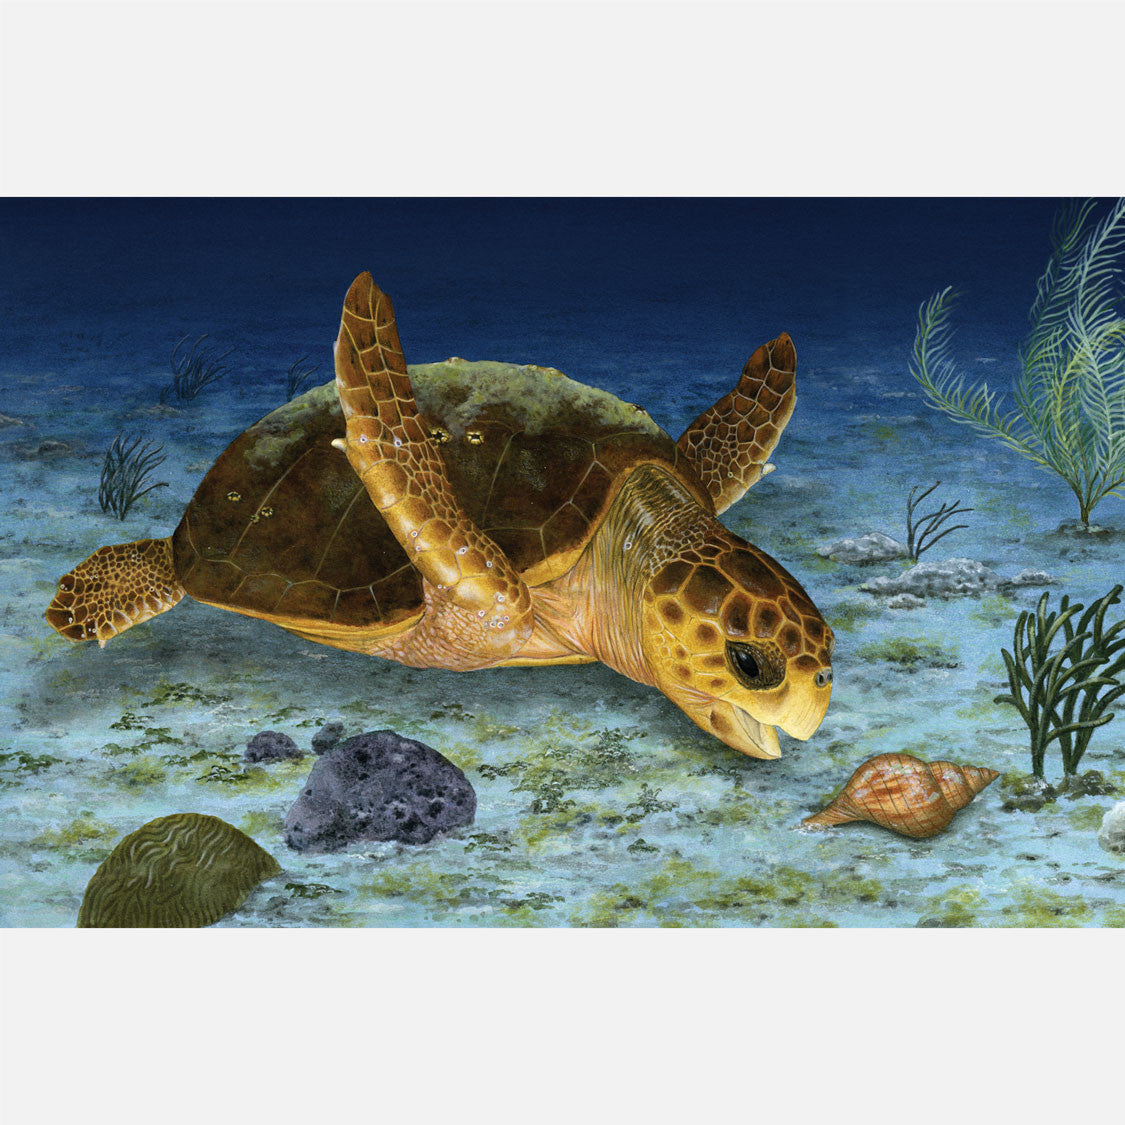 This beautiful, highly detailed illustration is of a loggerhead sea turtle, caretta caretta, approaching a tulip snail. 